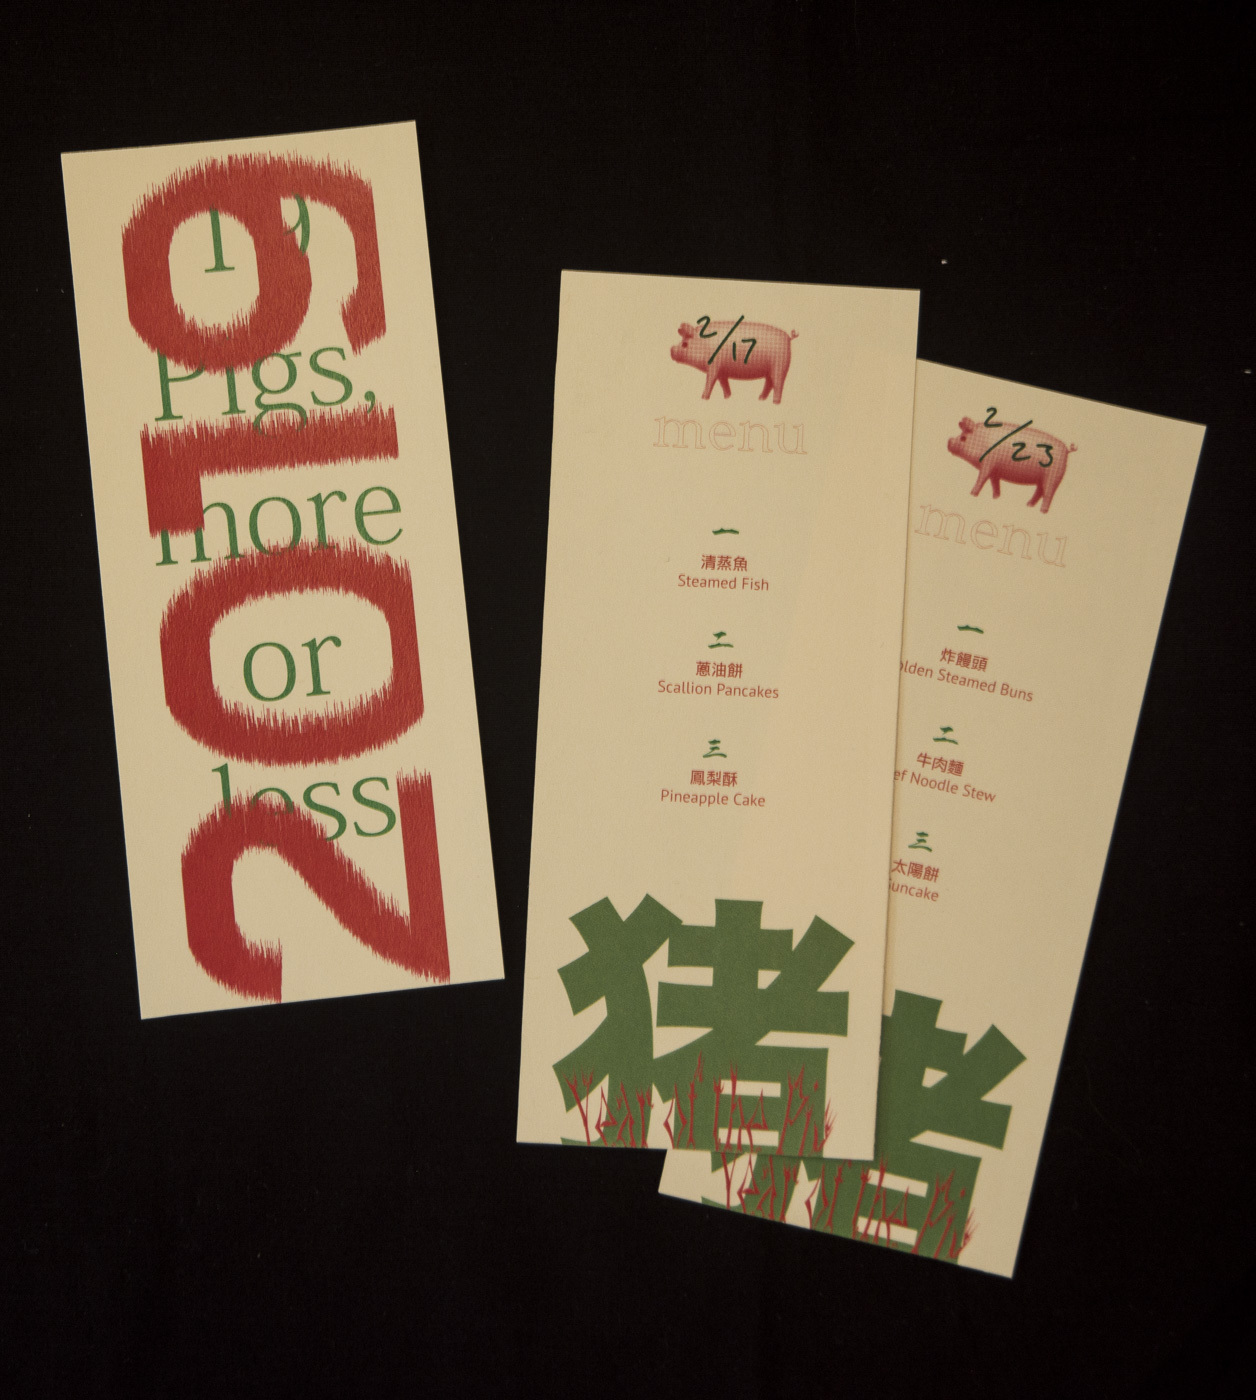 menus from the 19 Pigs event in 2019. They are printed in red and green ink.